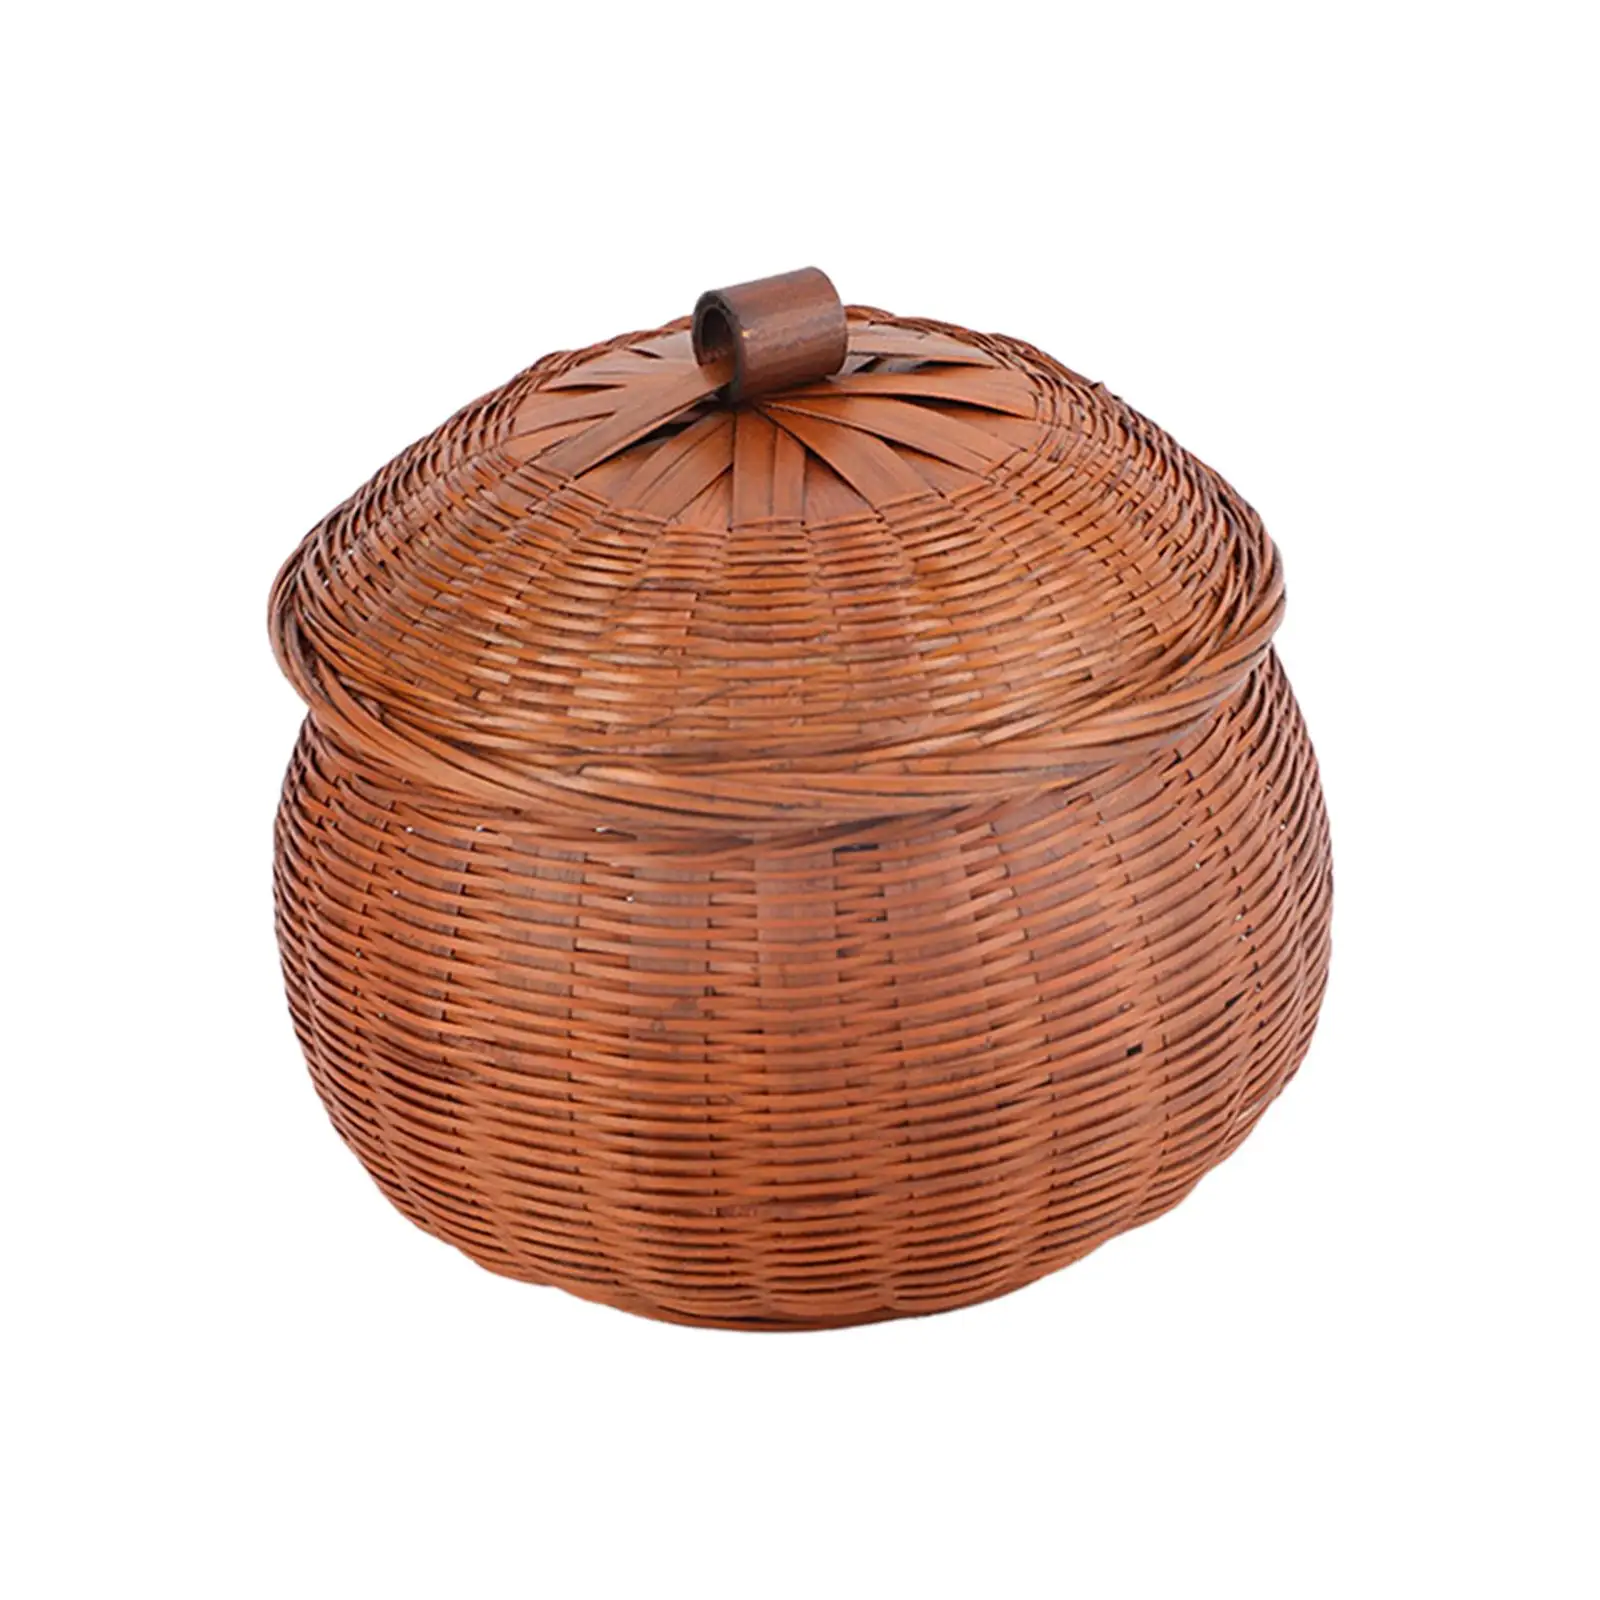 Round Rattan Storage Box Smooth with Cover Sundries Container Handwoven Pumpkin Basket for Cafe Cake Shops Family Home Offices